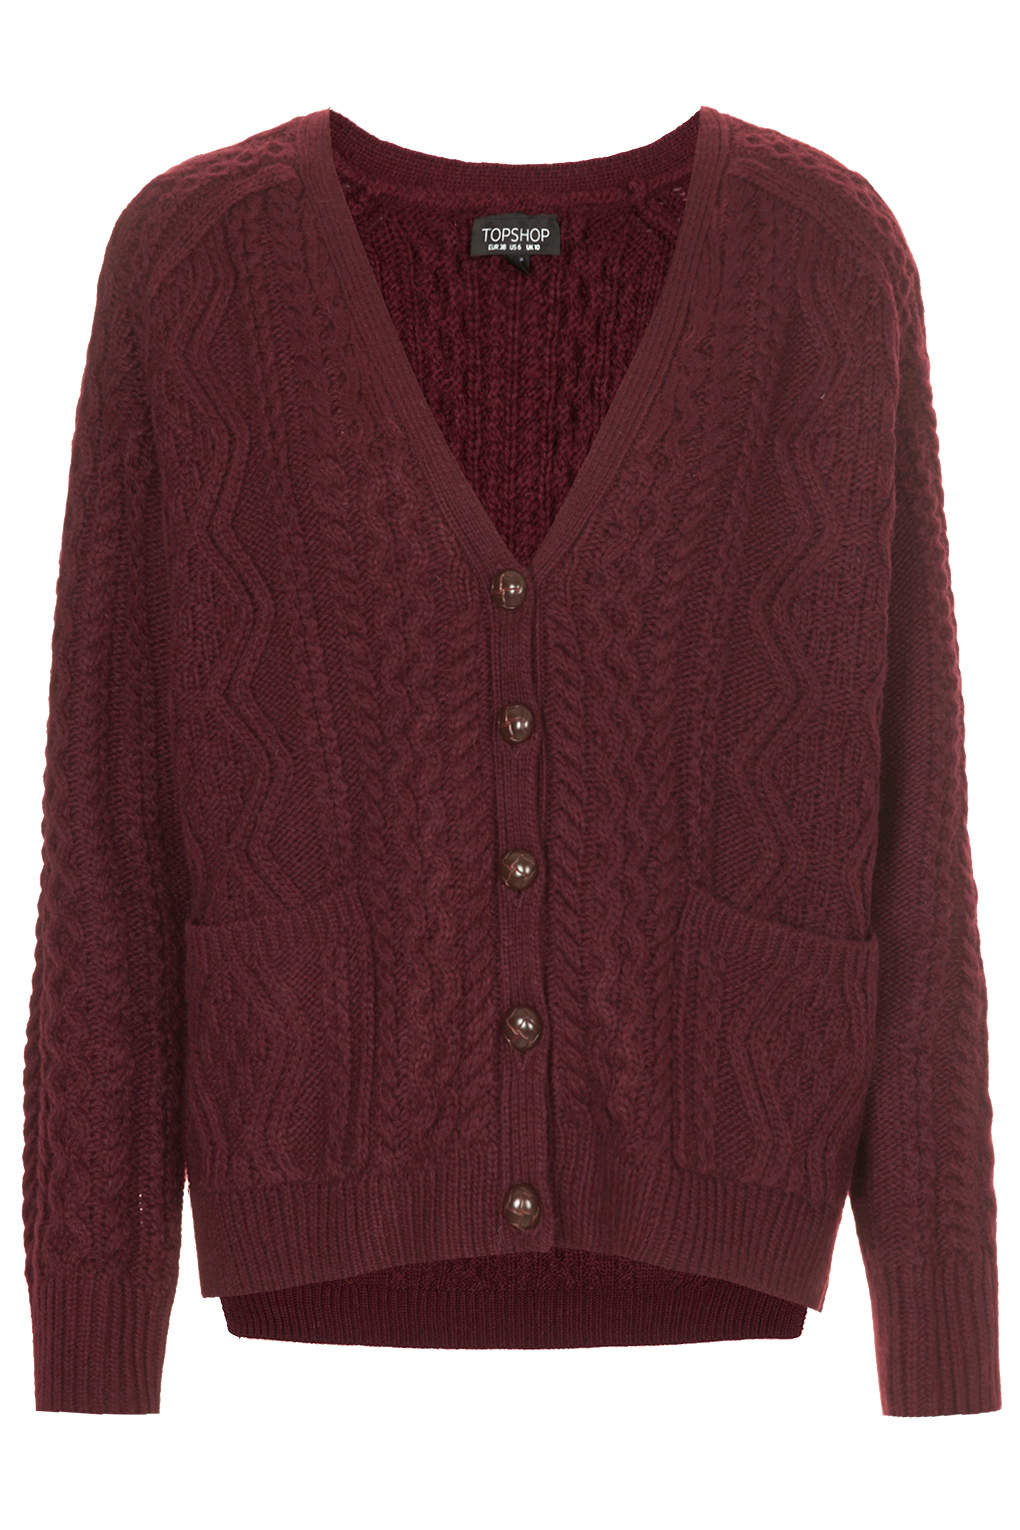 Lyst - Topshop Cable Knit Cardigan in Red